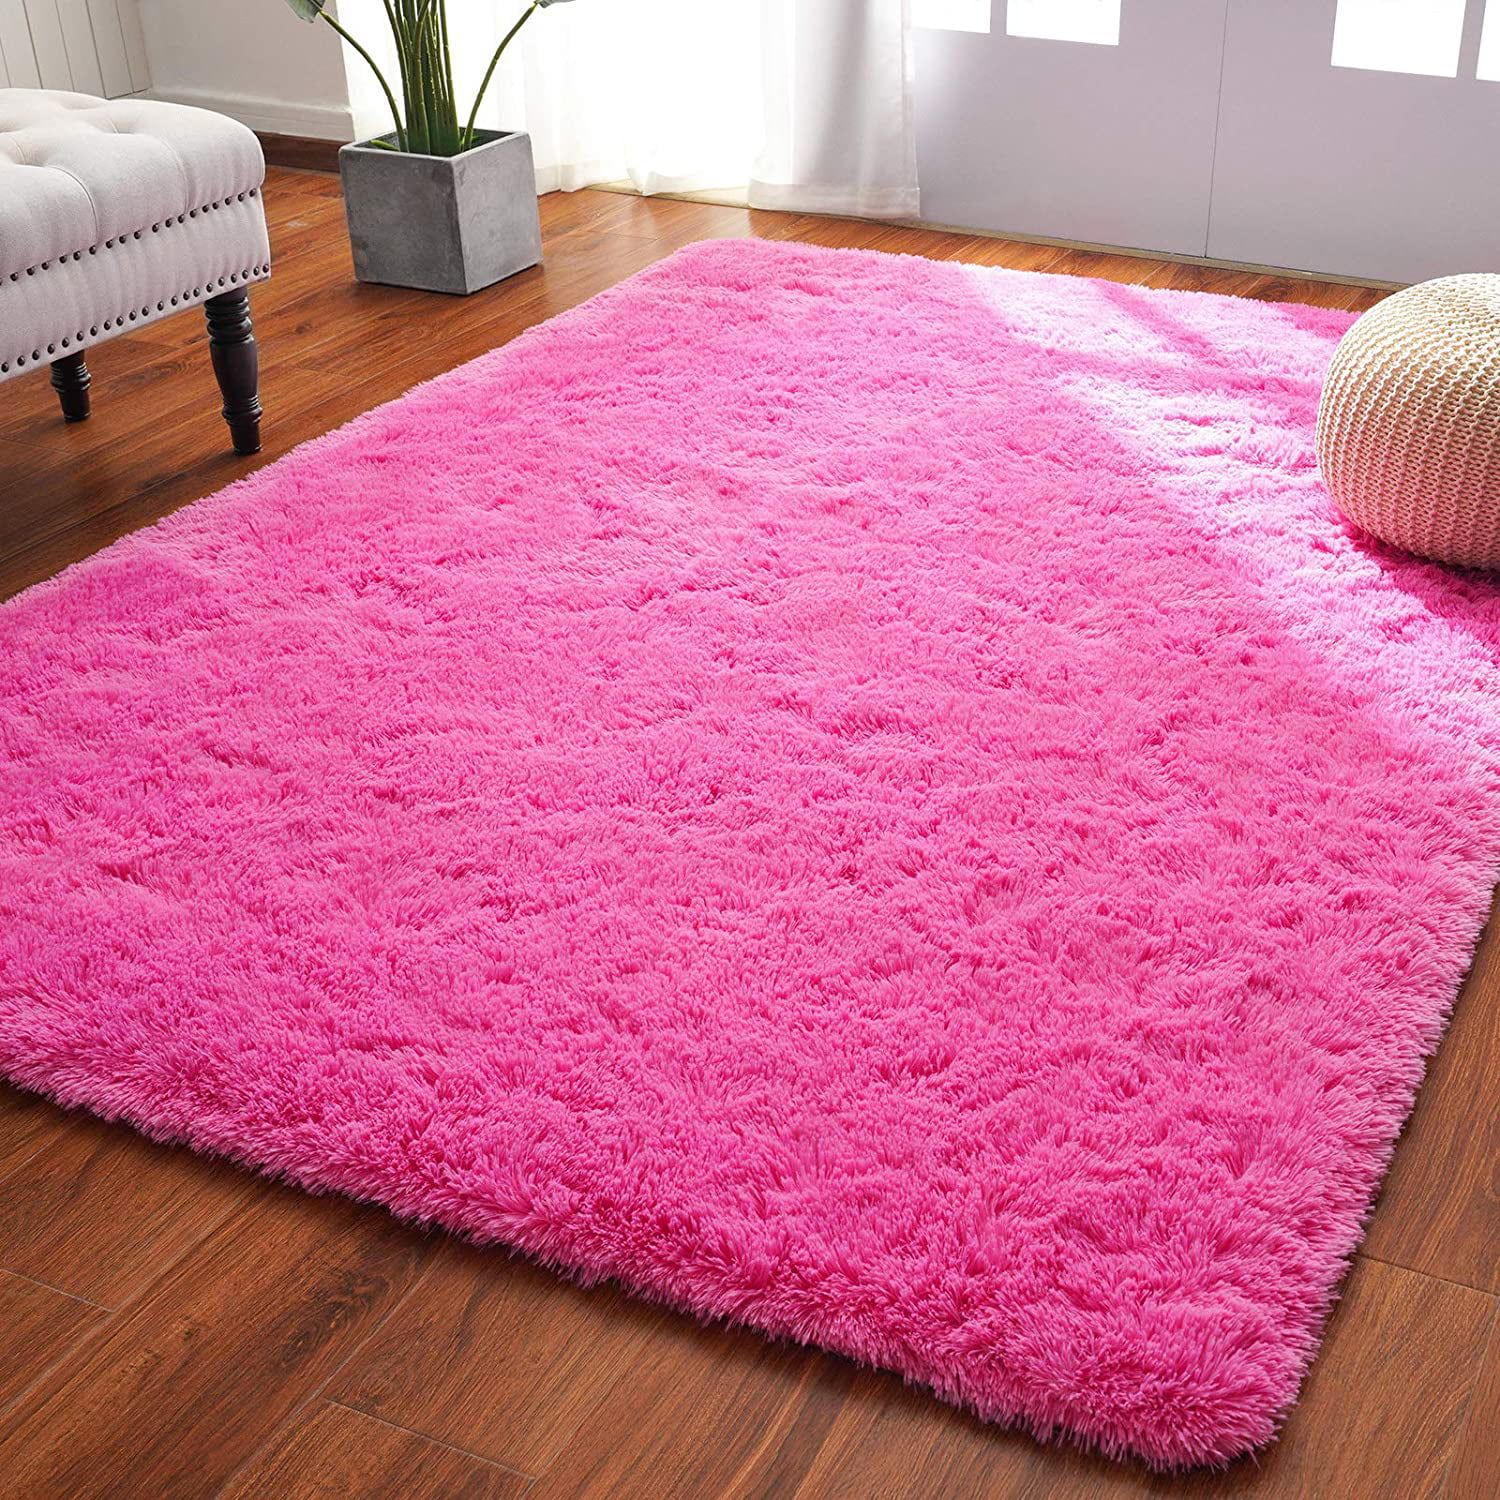 Arogan Super Soft Fluffy Area Rug For Living Room, Shaggy Carpet For  Bedroom Nursery Room,6'X9',Hot Pink – Walmart With Pink Soft Touch Shag Rugs (View 2 of 15)